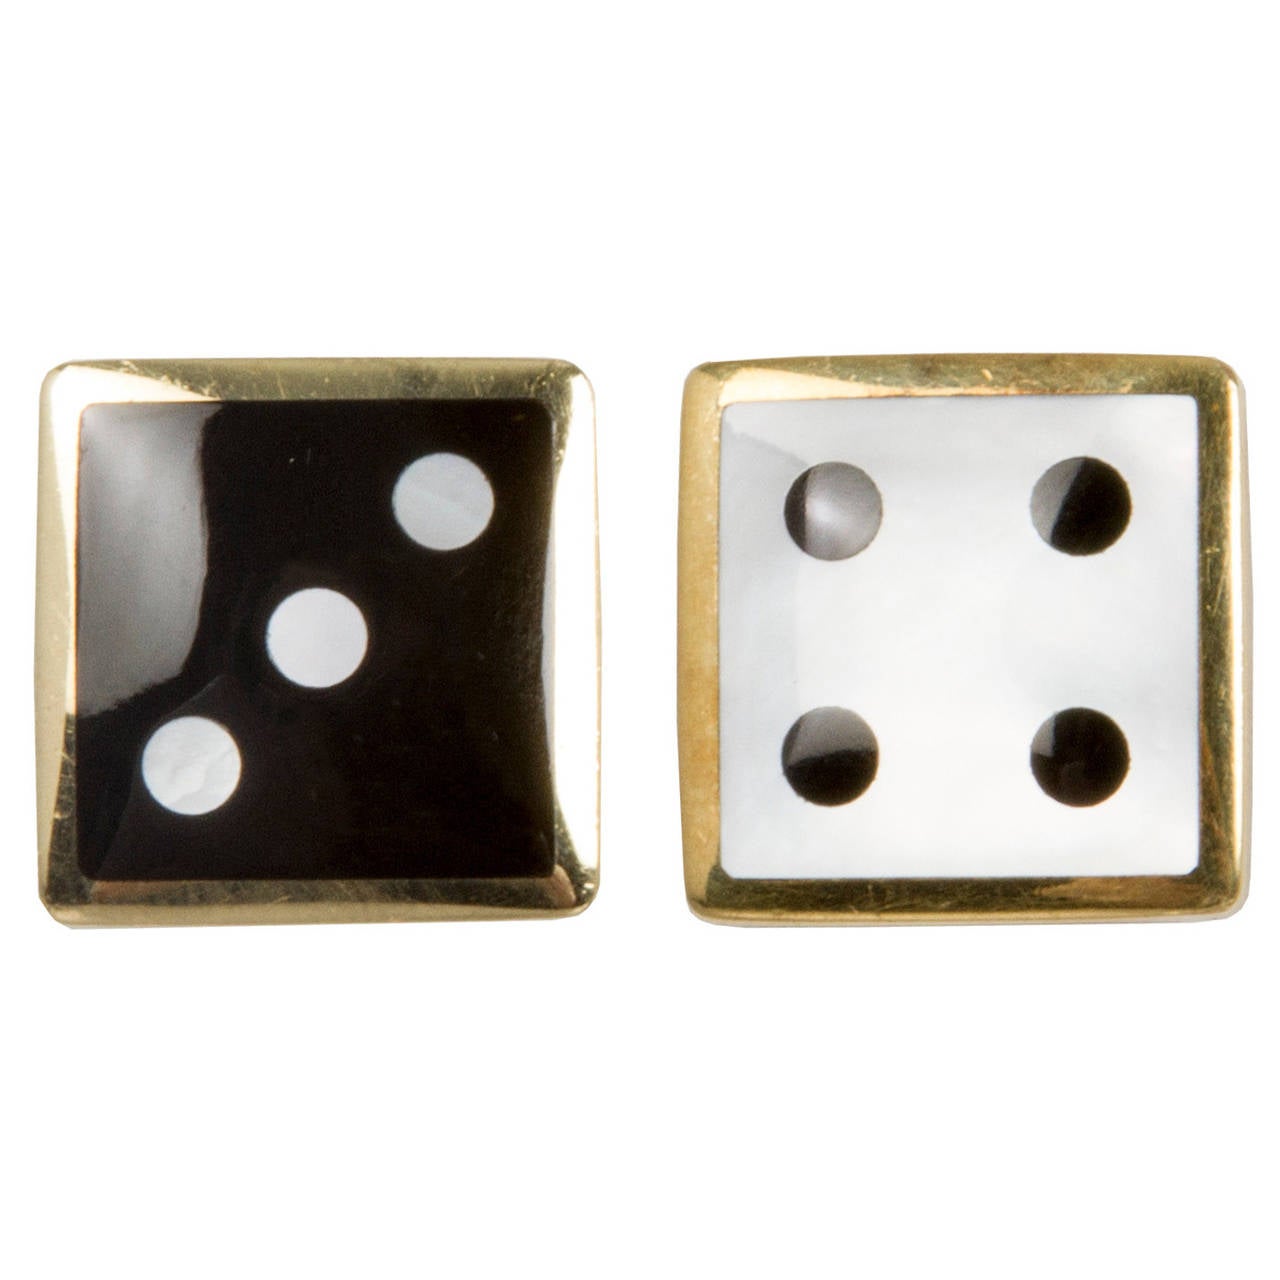 These are fun and good looking clip back earrings by Tiffany & Co. They are 18k yellow gold set with onyx and mother of pearl.